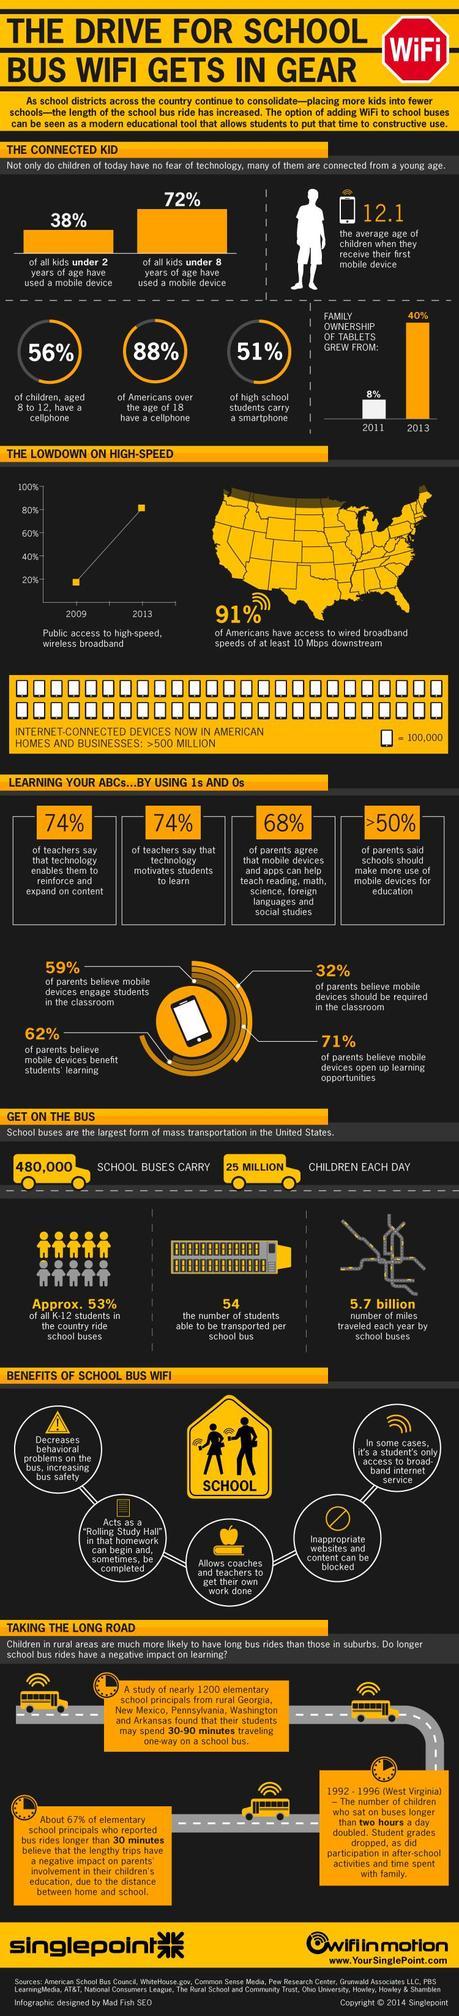 The Push For School Bus Wifi Infographic